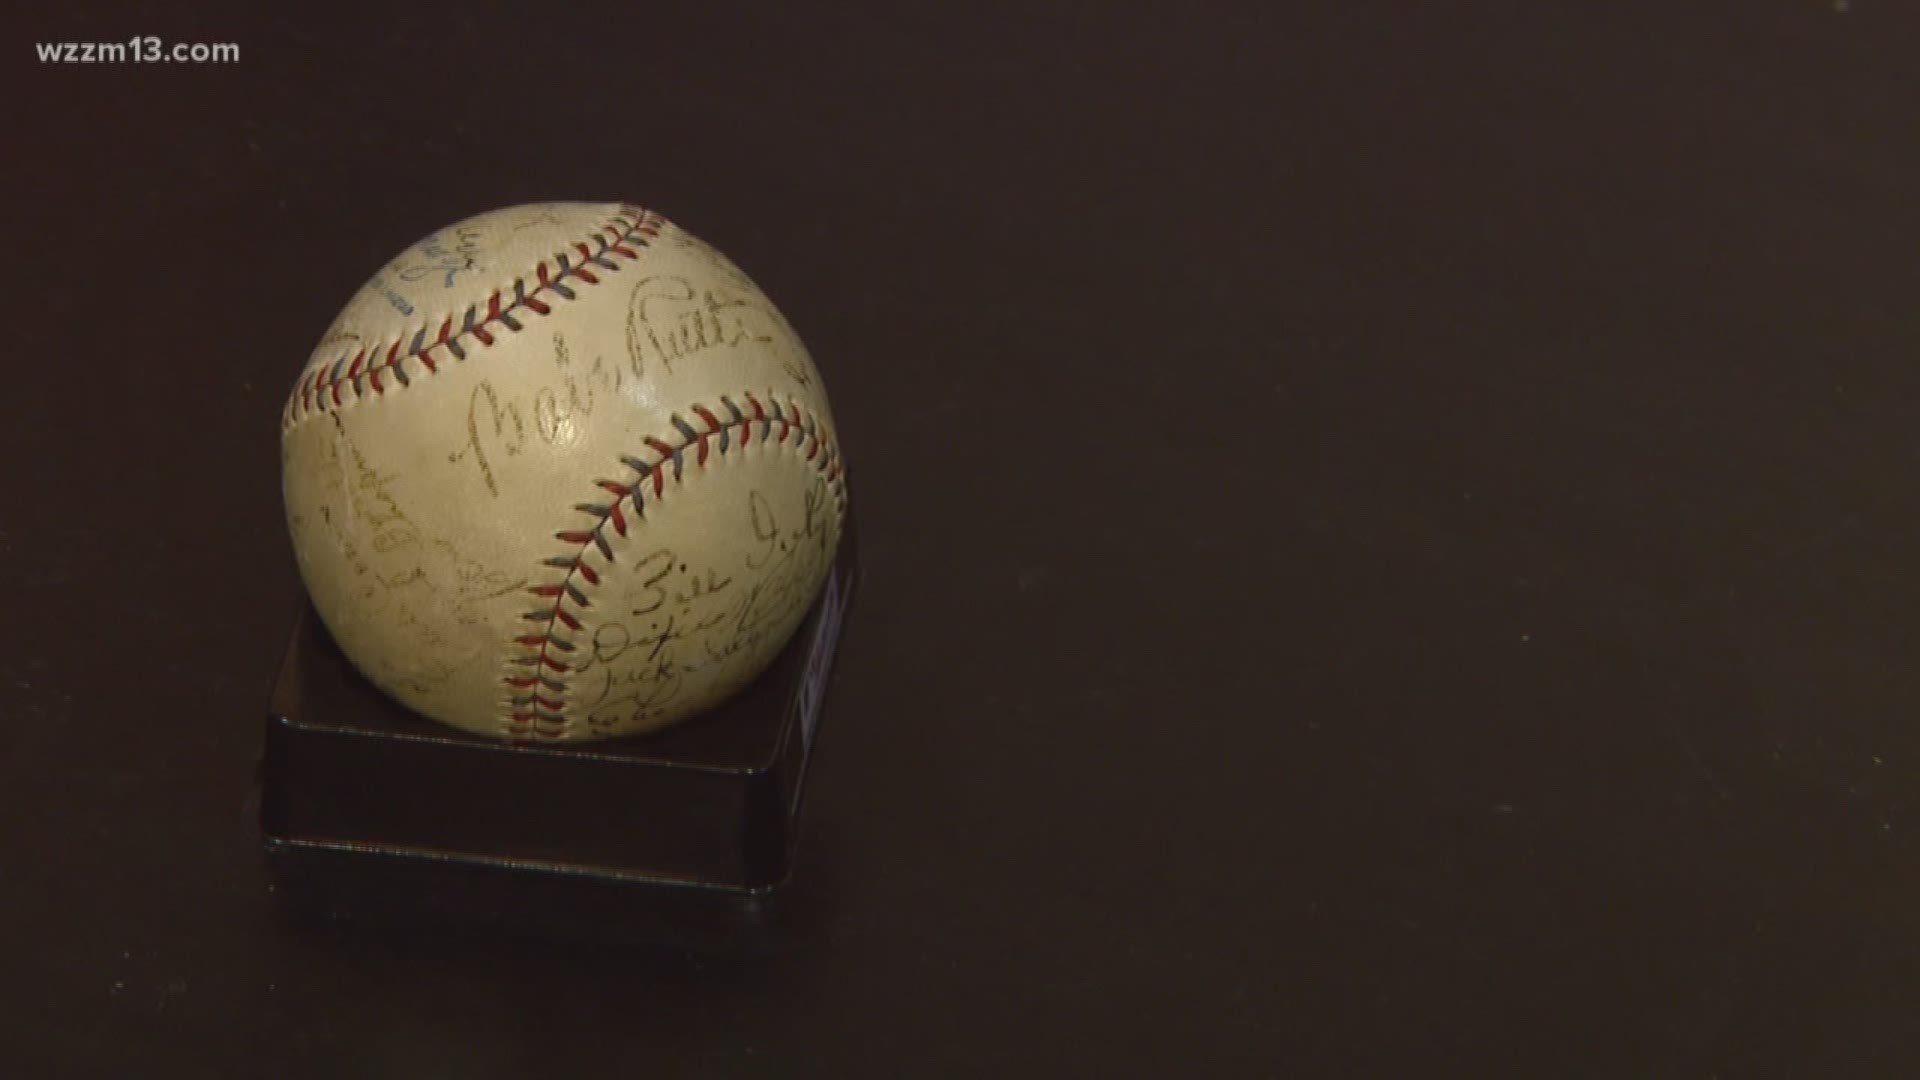 Our Michigan Life: West Michigan man possess baseball signed by 1934 Yankees